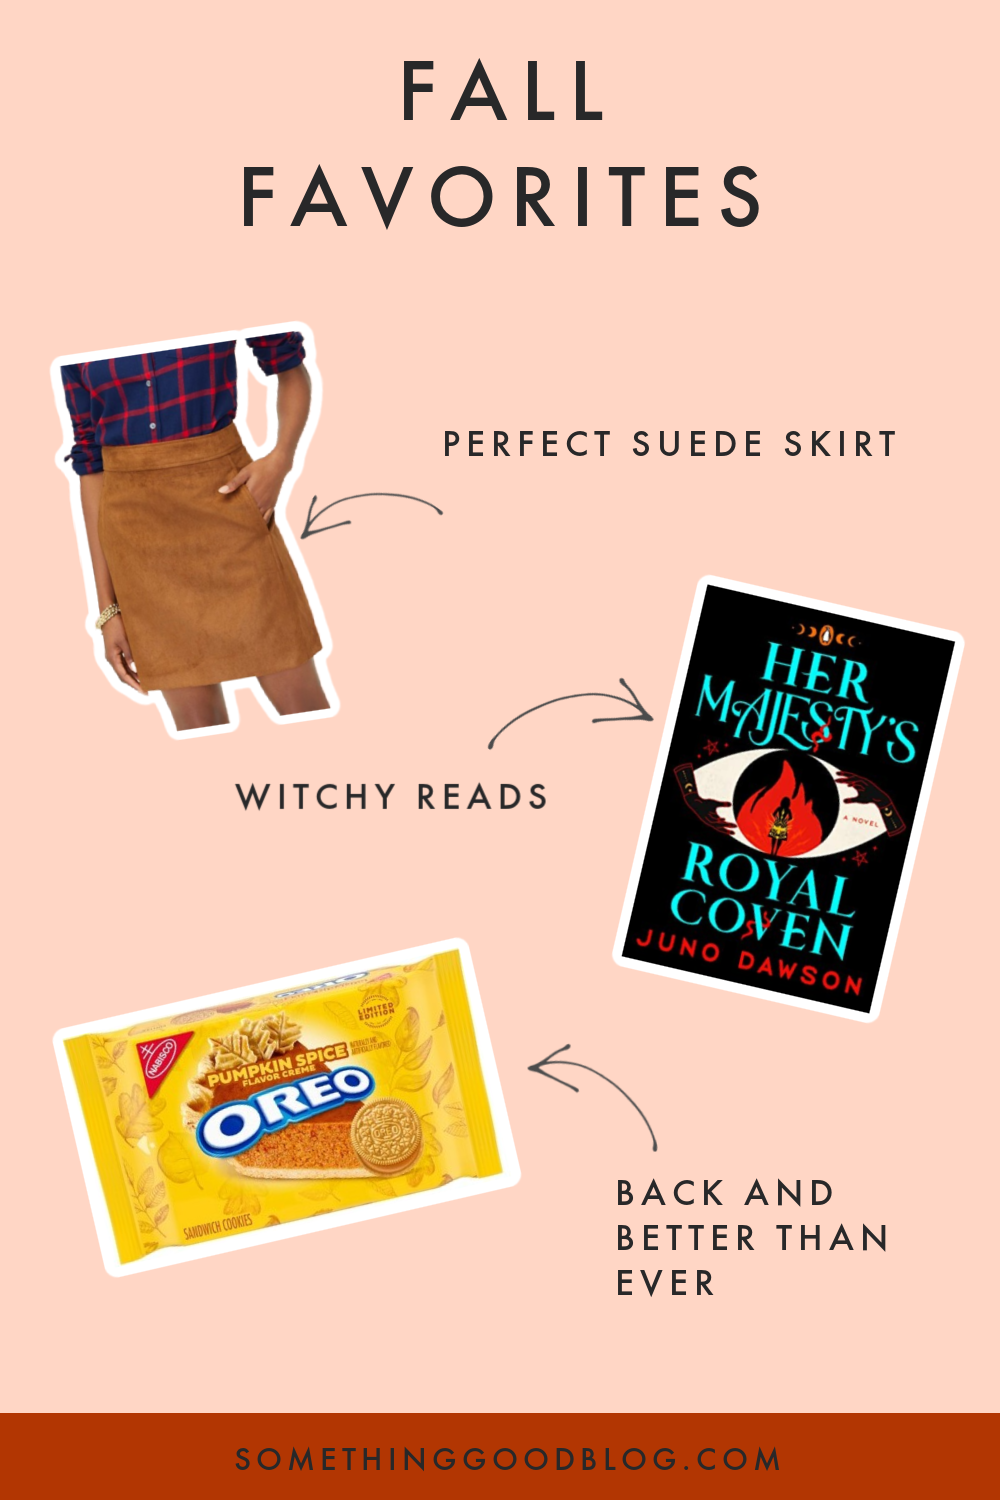 suede j.crew factory skirt, pumpkin oreos, book, her majesty's royal coven, text that reads "fall favorites", fall styles